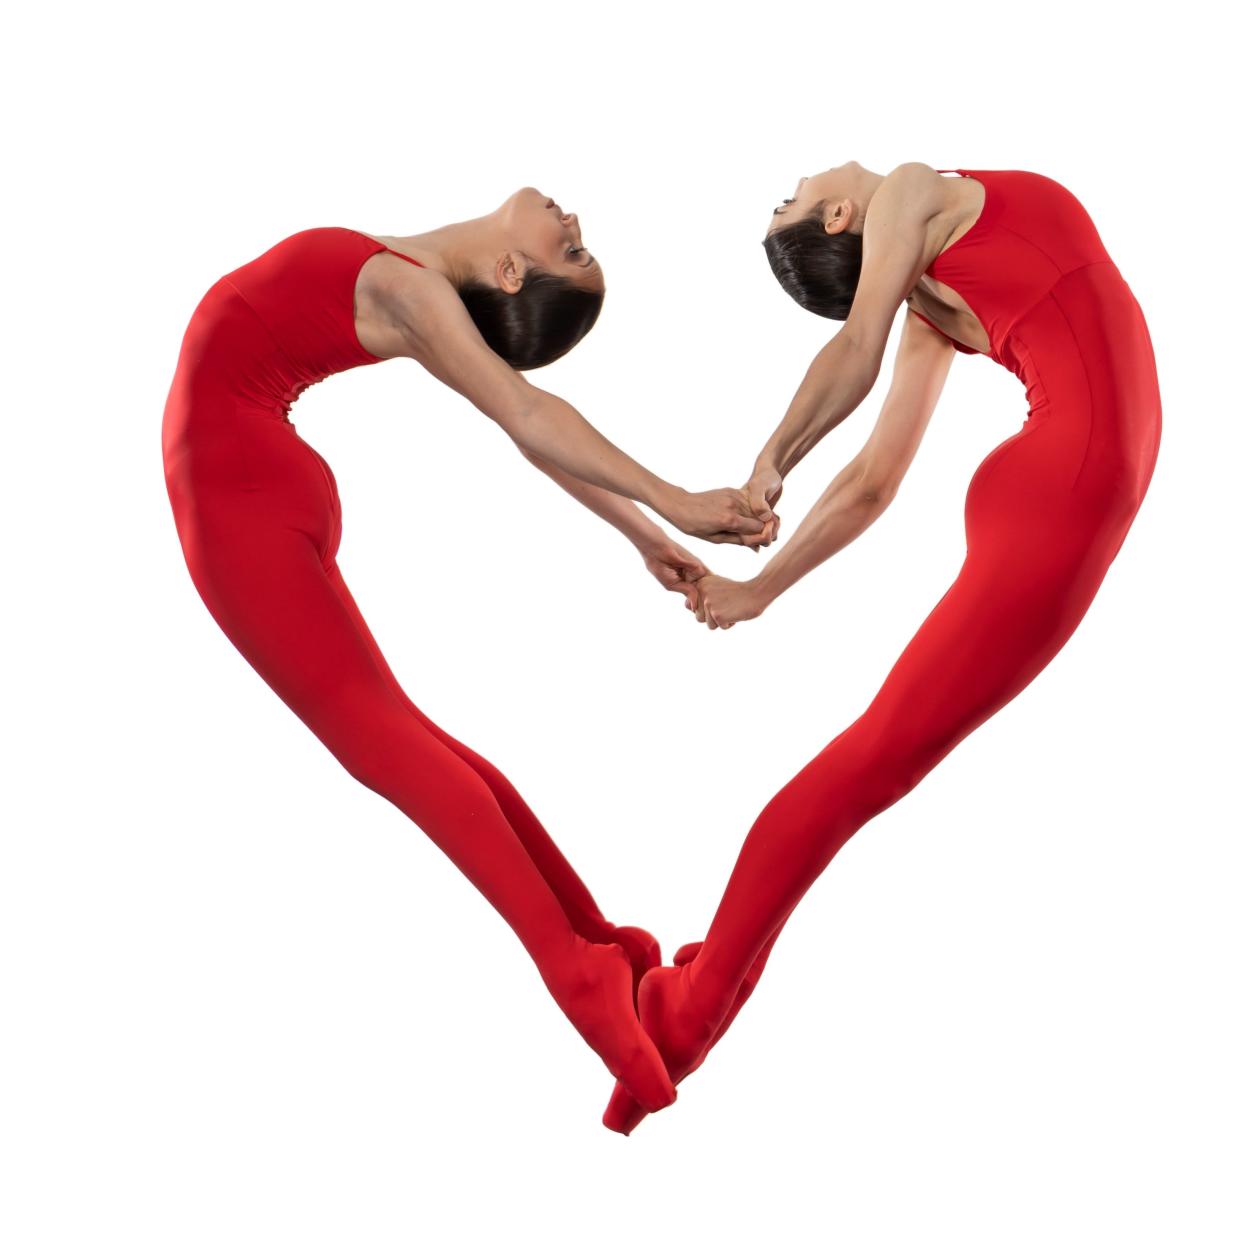 Nothing says Happy Valentine’s Day more than love, and Dance Alive National Ballet gives you love in abundance! “Love in the Swamp” sets the mood with the DANB dancers in Gator orange and blue dancing exuberantly down the aisles on Feb. 10.